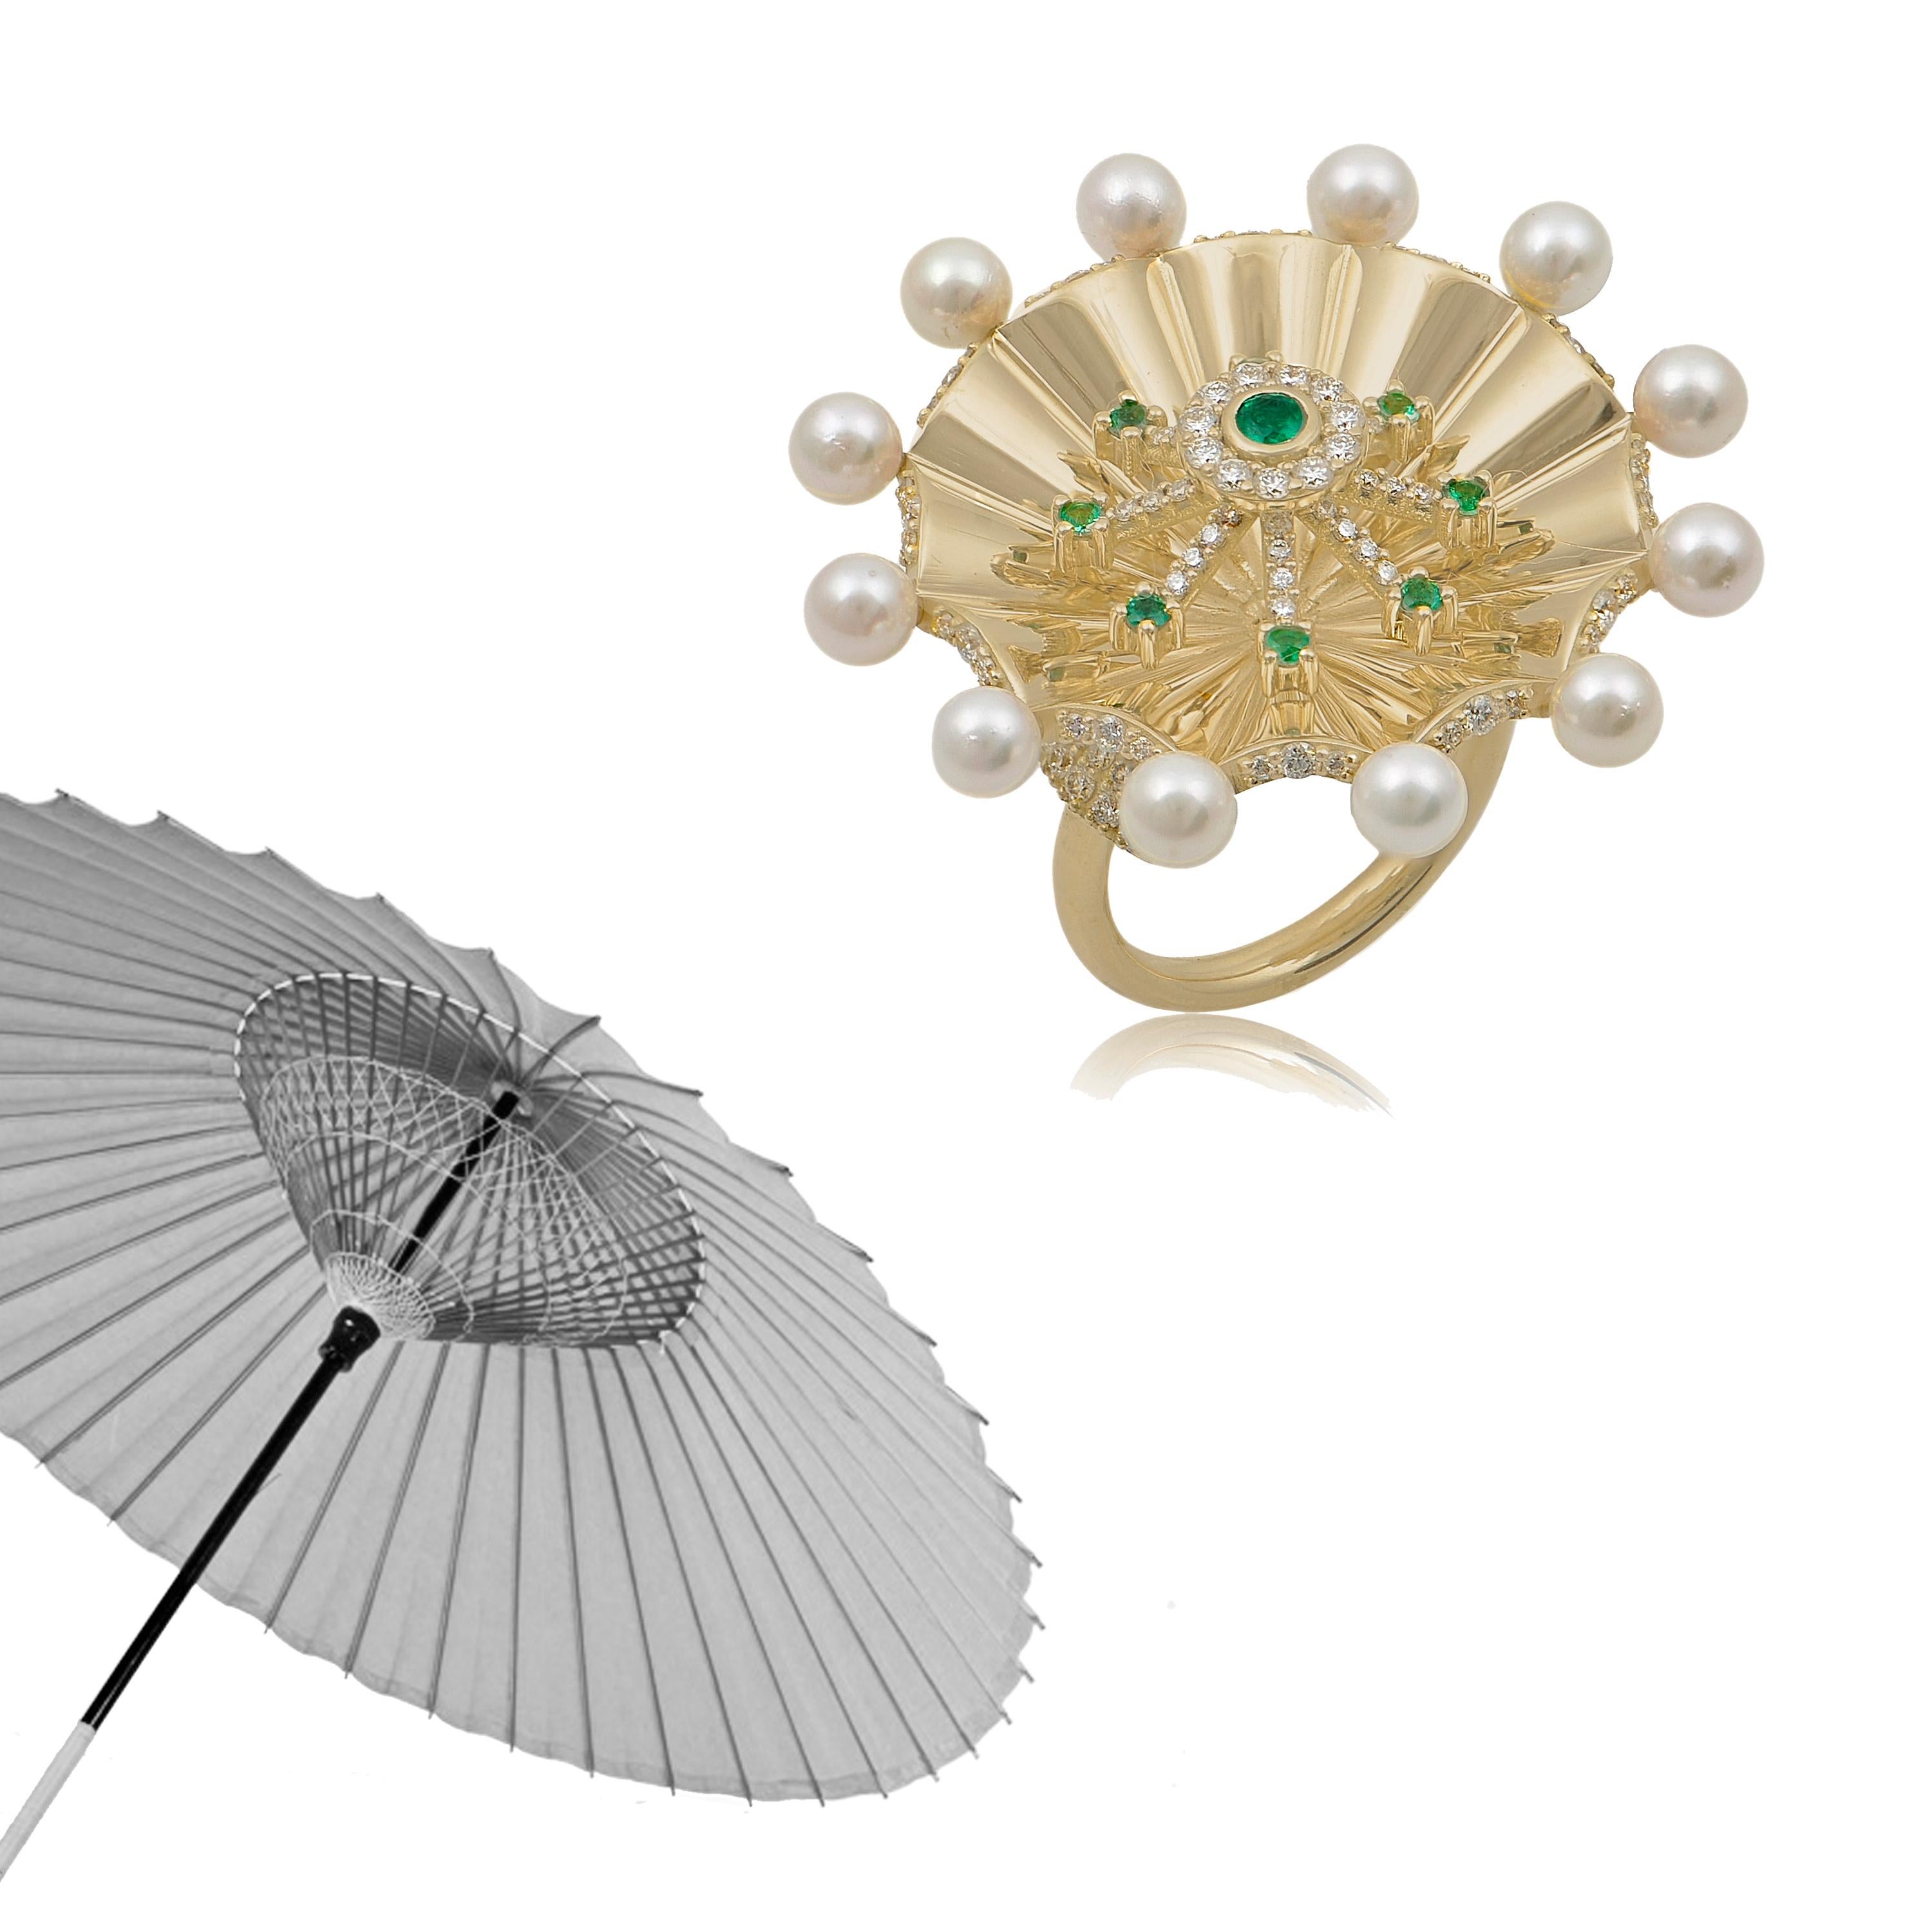 Pear Cut Umbrella Ring in 18 Karat Gold with Diamonds, Emeralds And Pearls